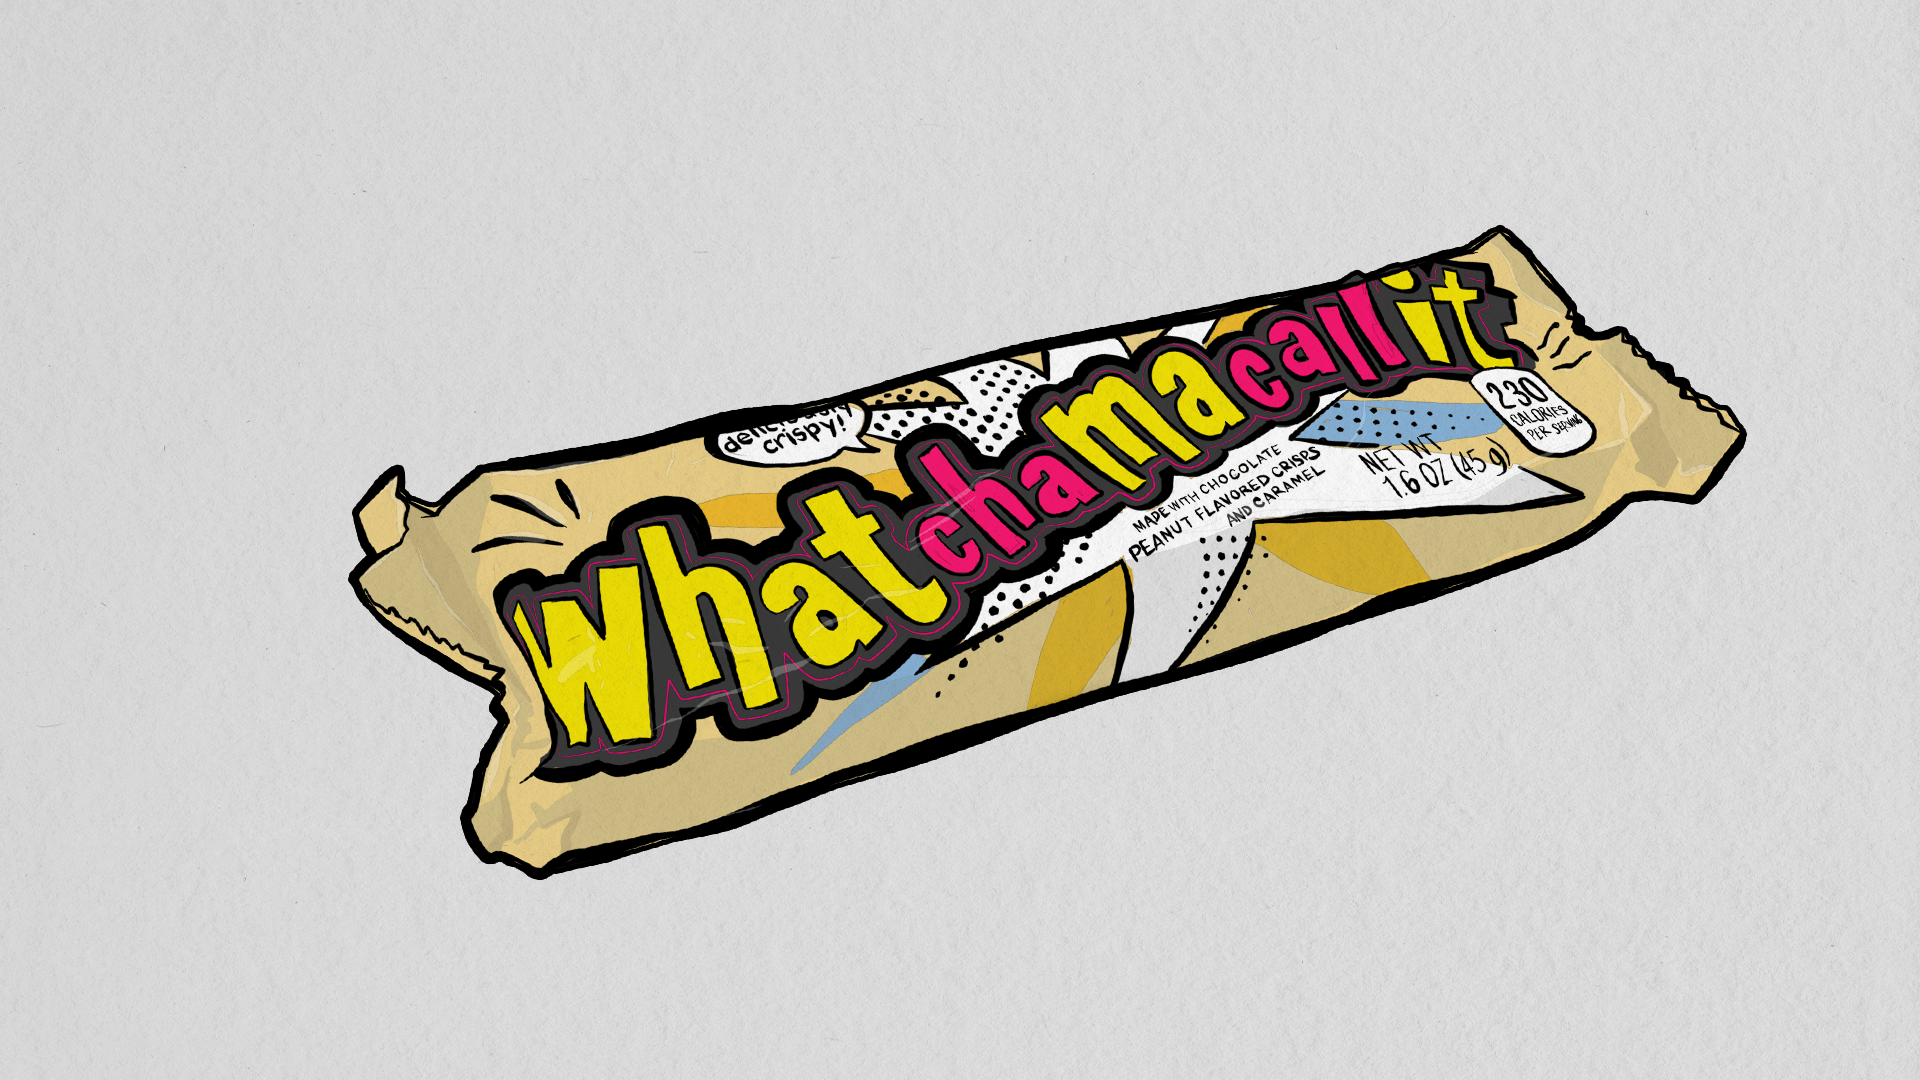 CandyisDandy_Drawings_0005_Whatchamacallit-min.png